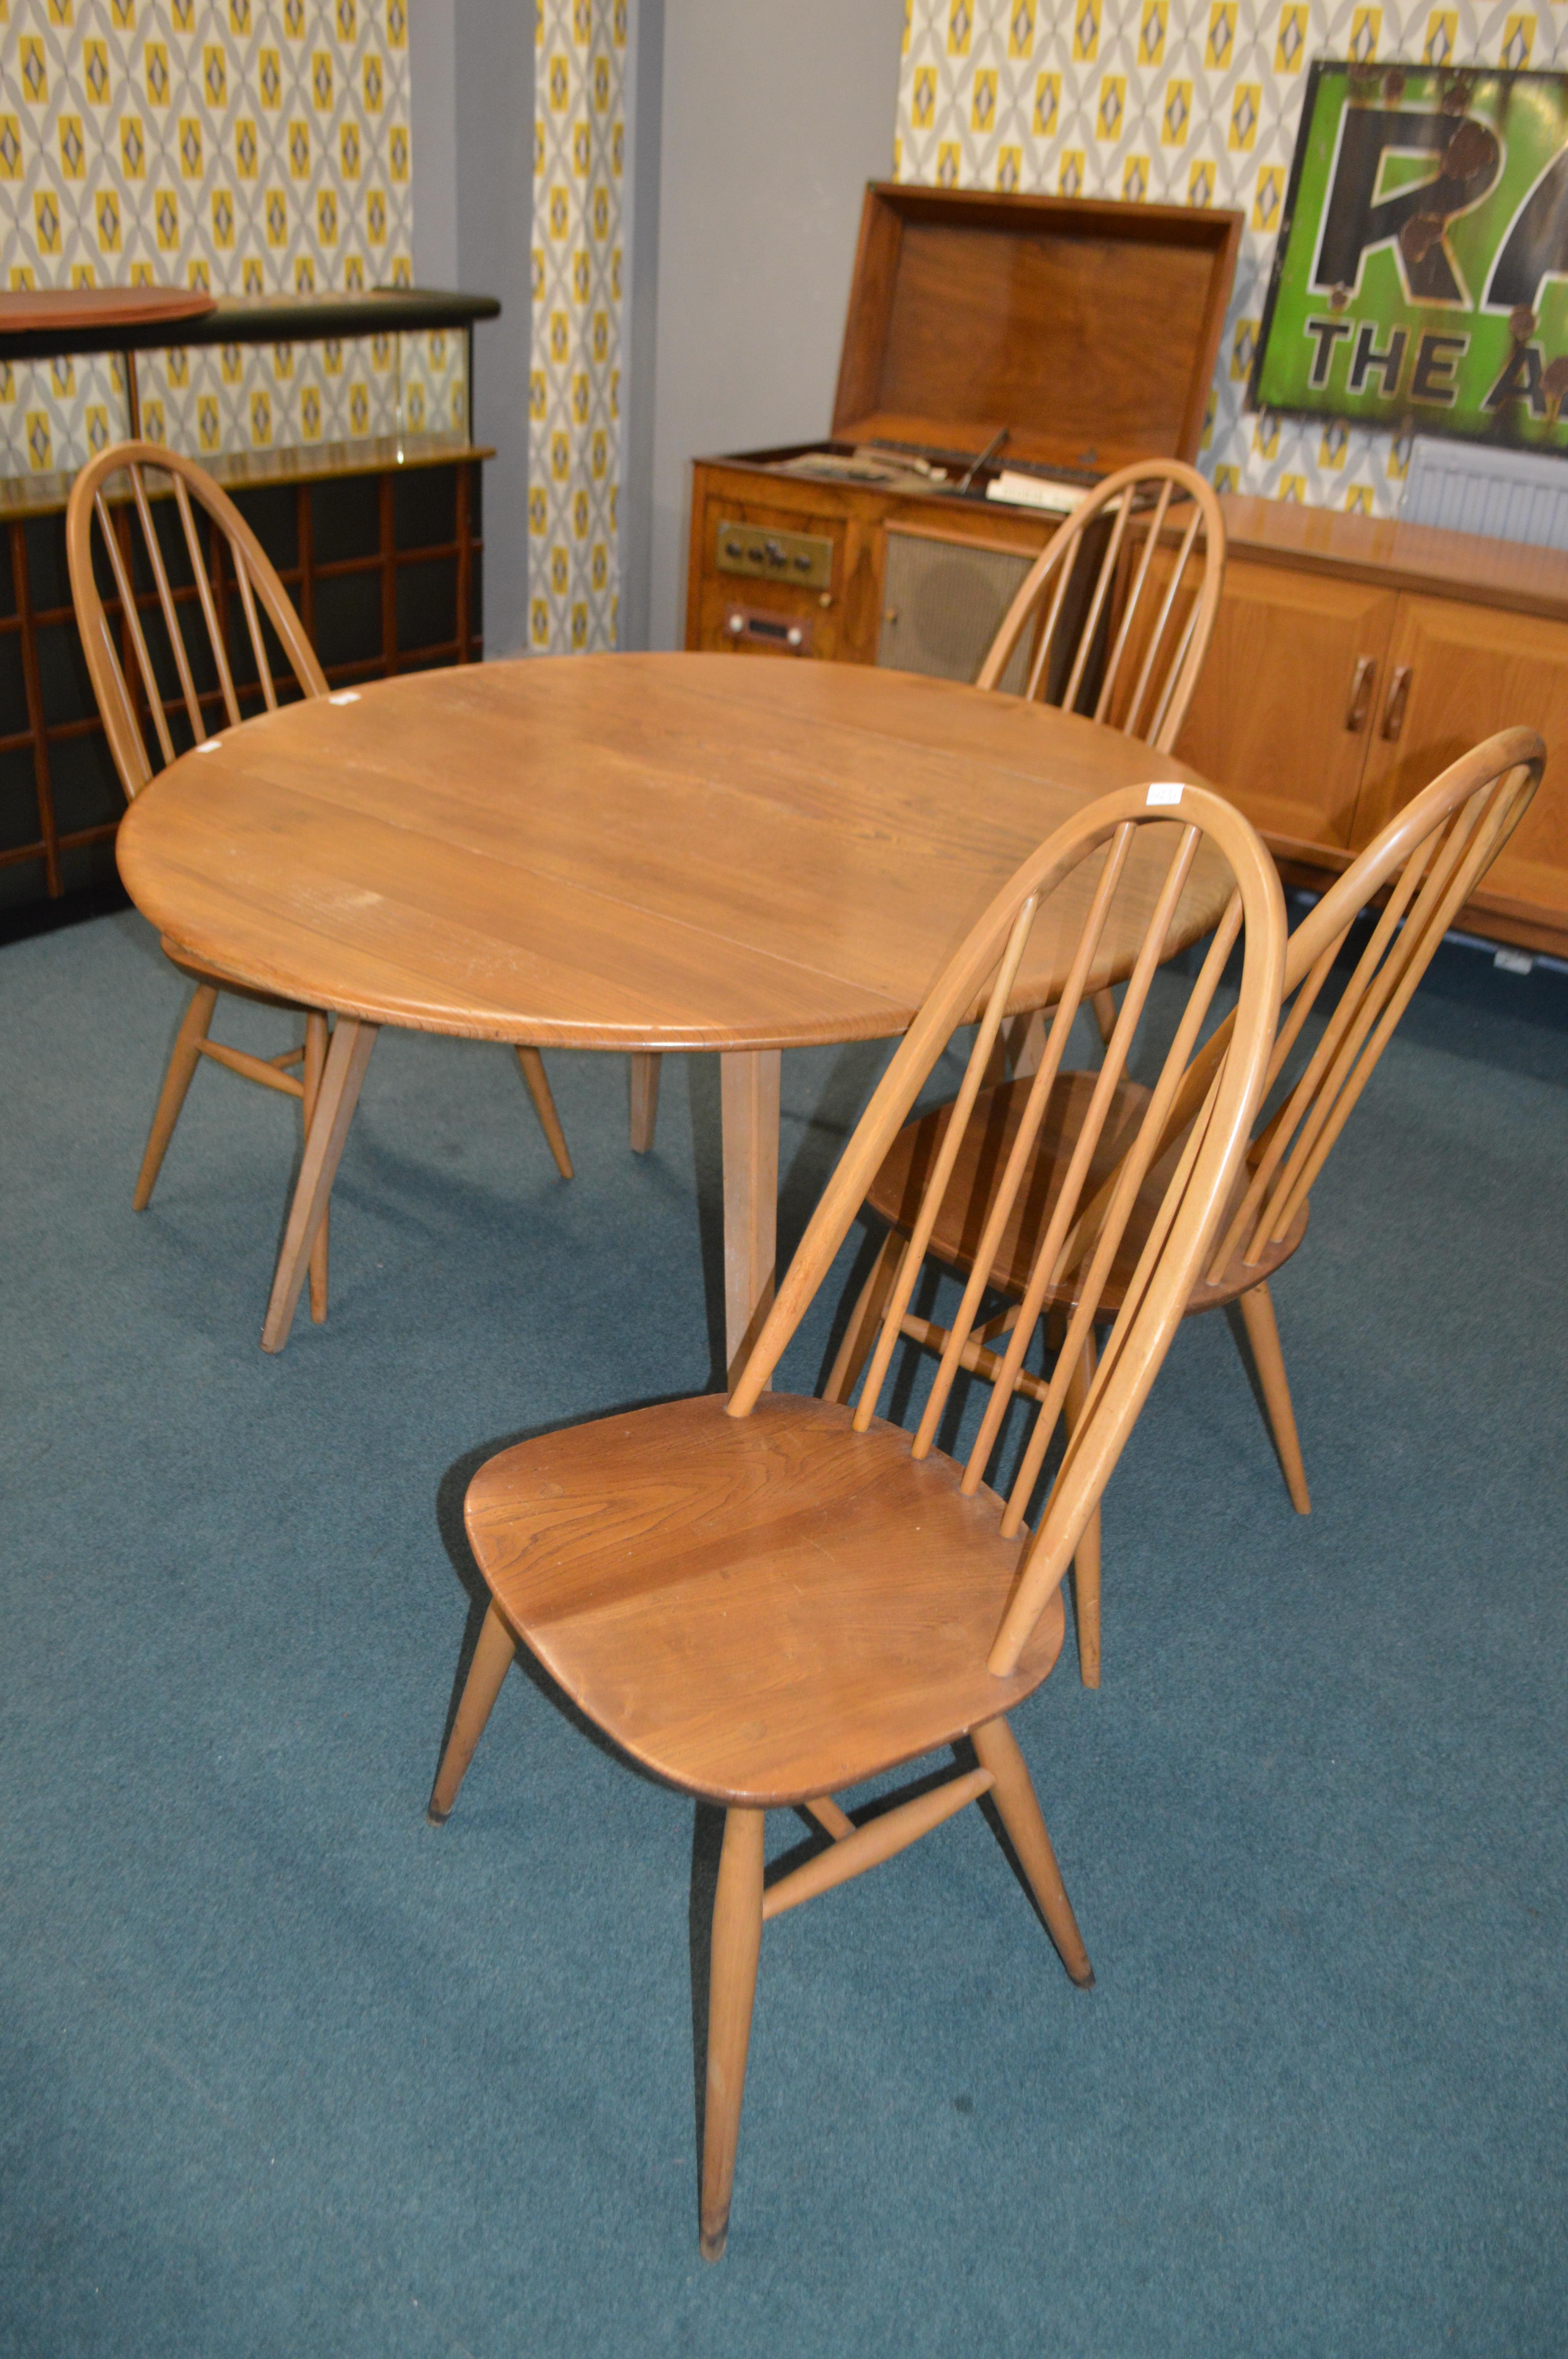 Ercol Oval Drop Leaf Dining Table with Four Matchi - Image 2 of 2